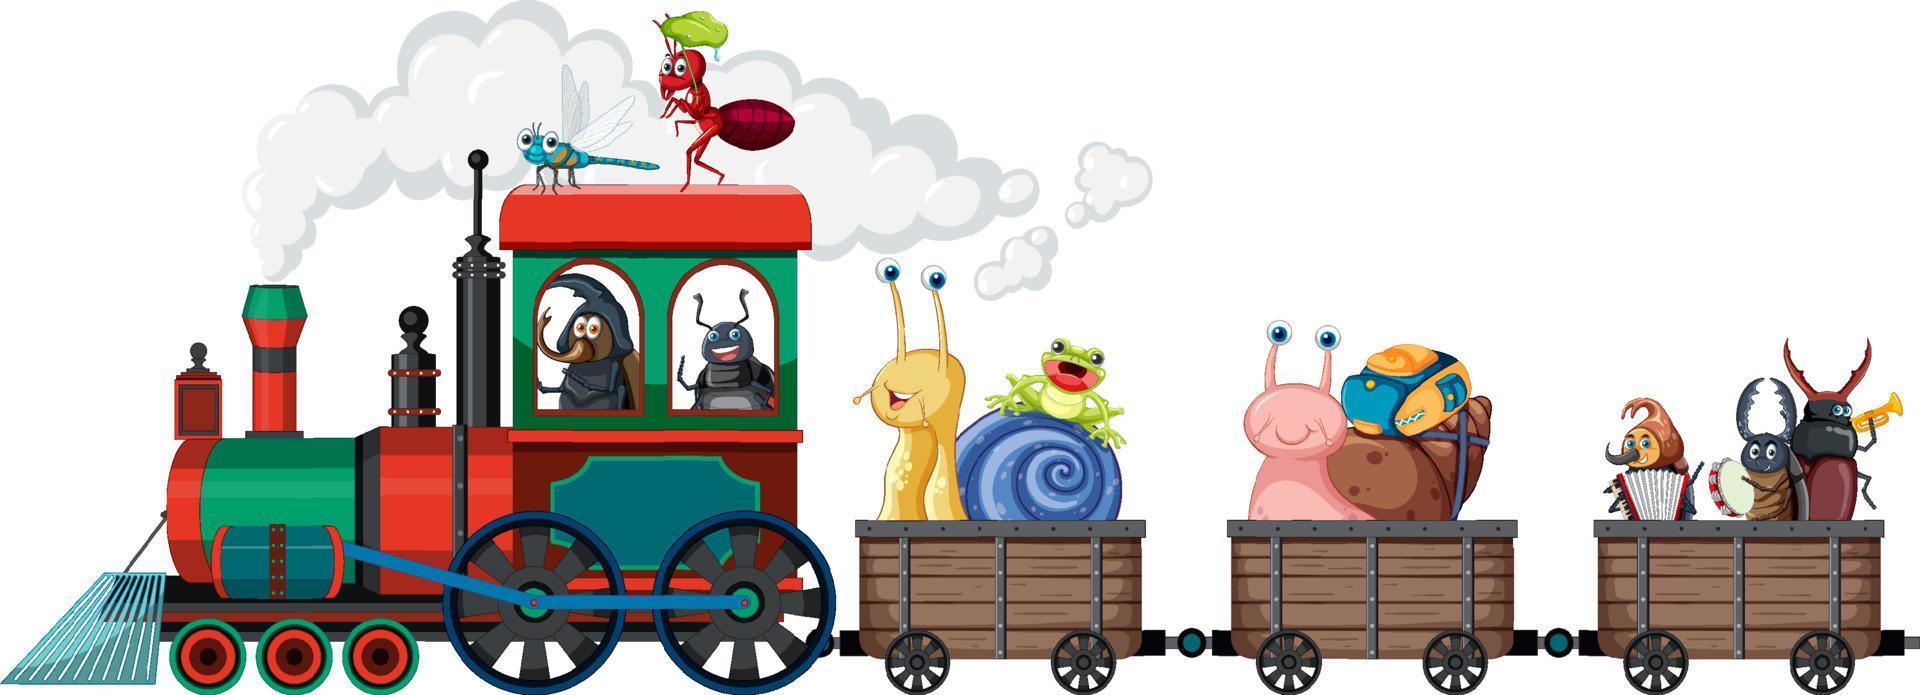 Many insects riding on the train vector